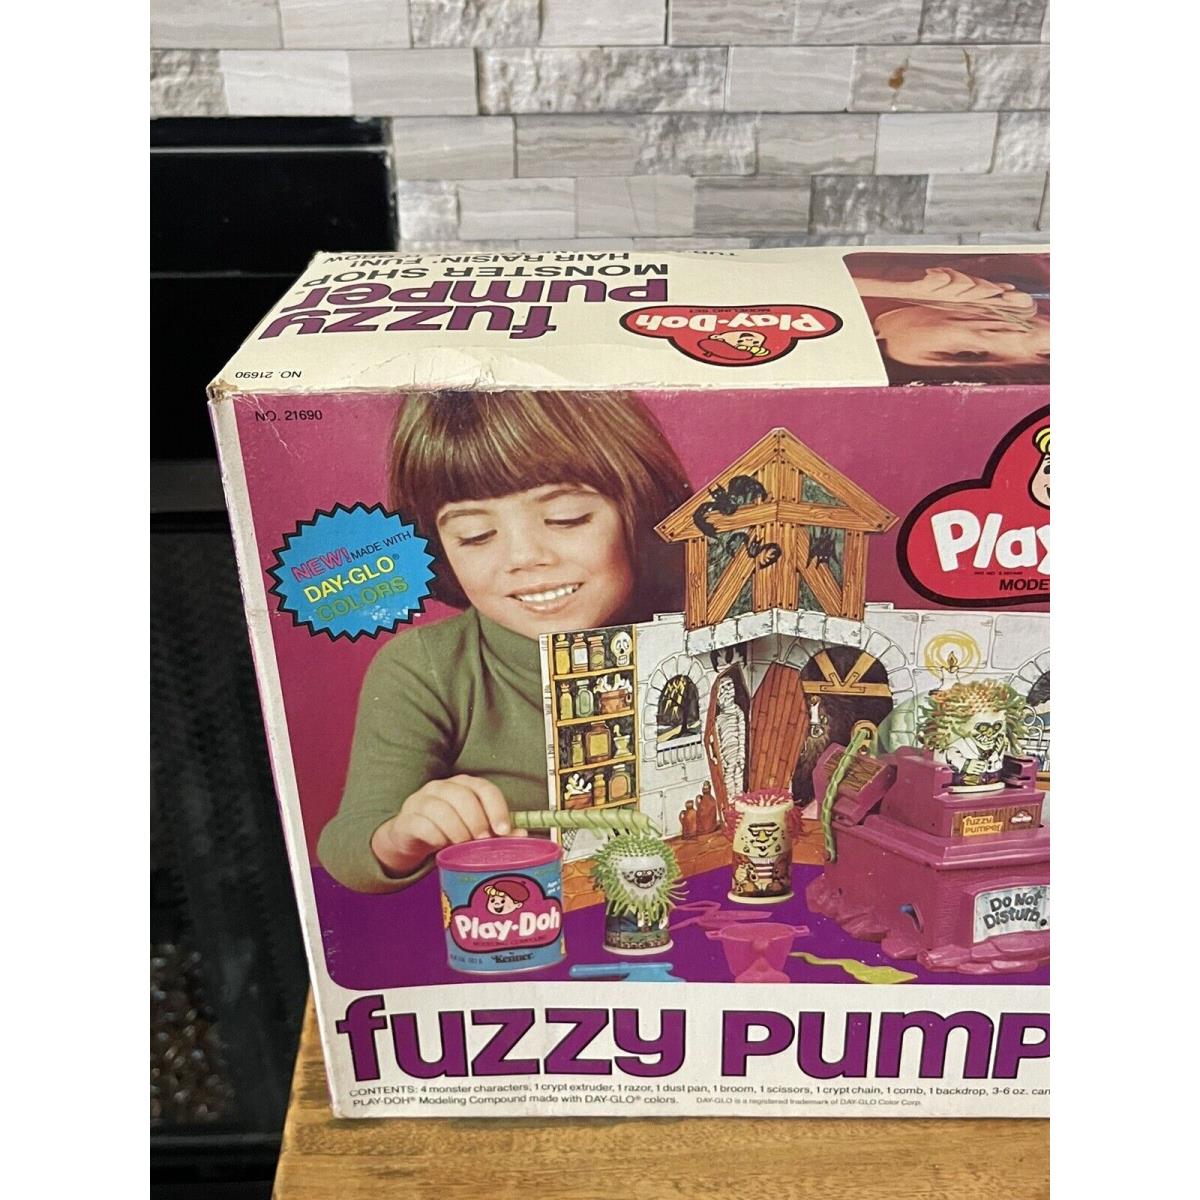 /sealed Play-doh Fuzzy Pumper Monster Shop Day Glow 1980 Rare Vintage